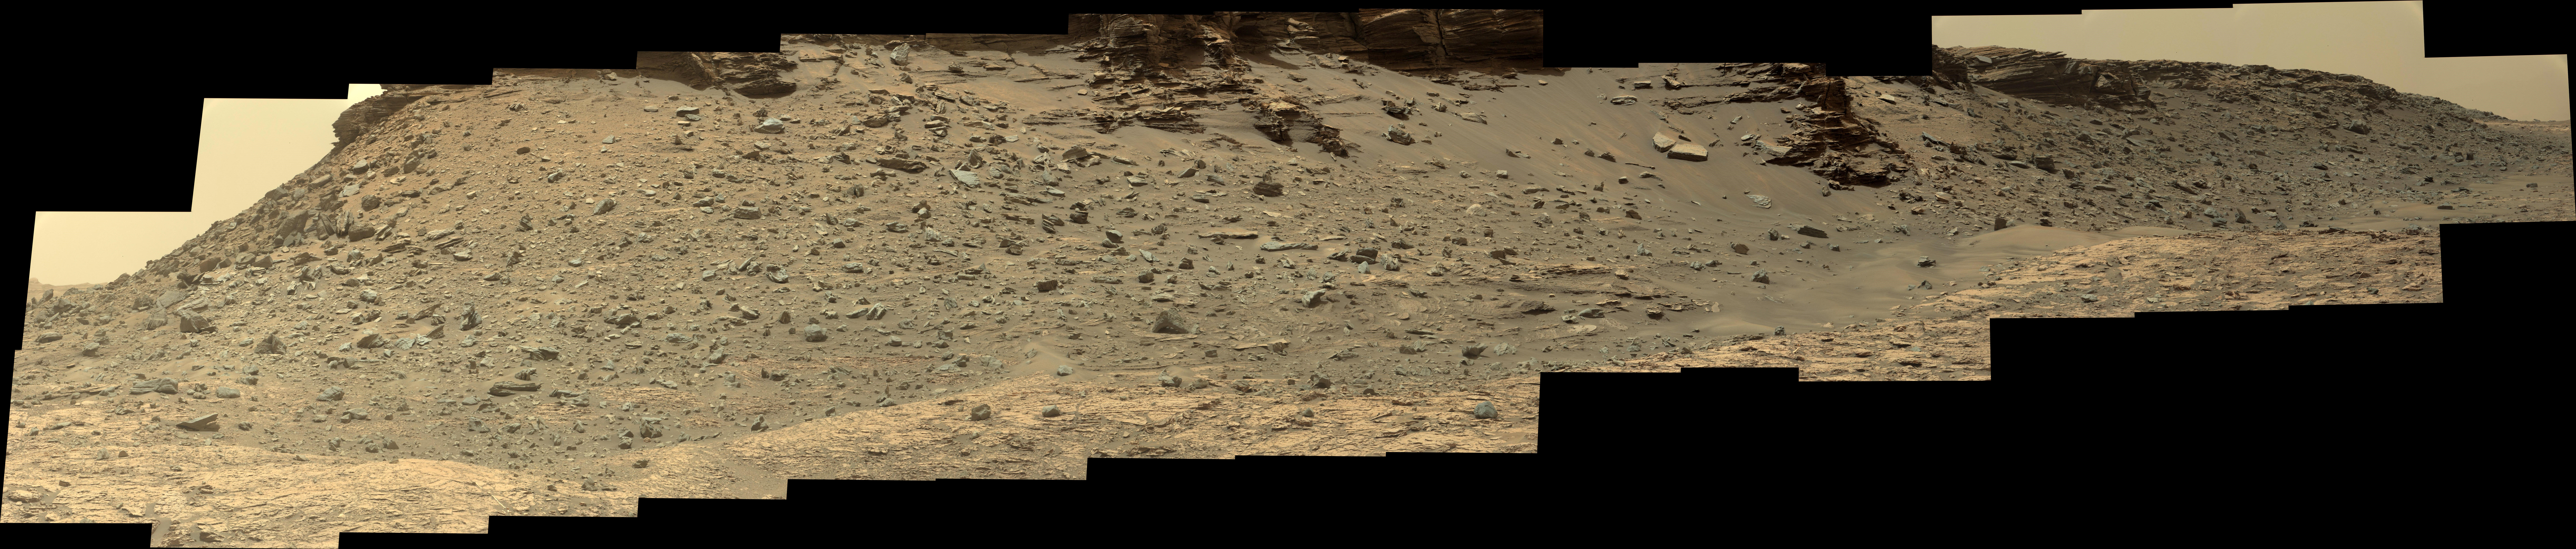 panoramic-curiosity-rover-view-3-sol-1450-was-life-on-mars